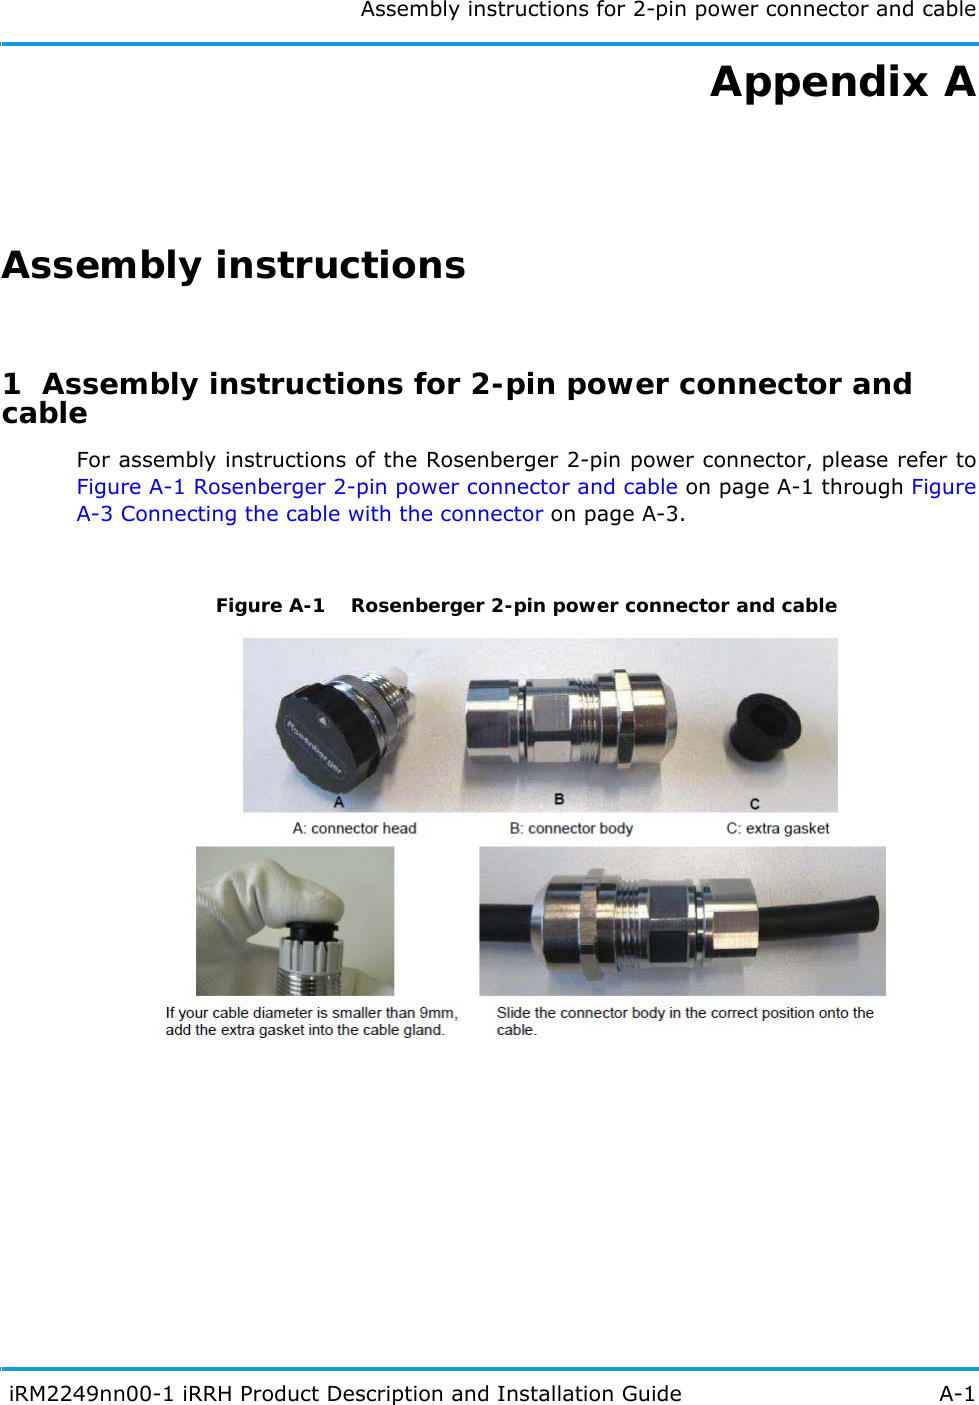 Assembly instructions for 2-pin power connector and cable iRM2249nn00-1 iRRH Product Description and Installation Guide A-1Appendix AAssembly instructions1  Assembly instructions for 2-pin power connector and cableFor assembly instructions of the Rosenberger 2-pin power connector, please refer to Figure A-1 Rosenberger 2-pin power connector and cable on page A-1 through Figure A-3 Connecting the cable with the connector on page A-3.Figure A-1  Rosenberger 2-pin power connector and cable